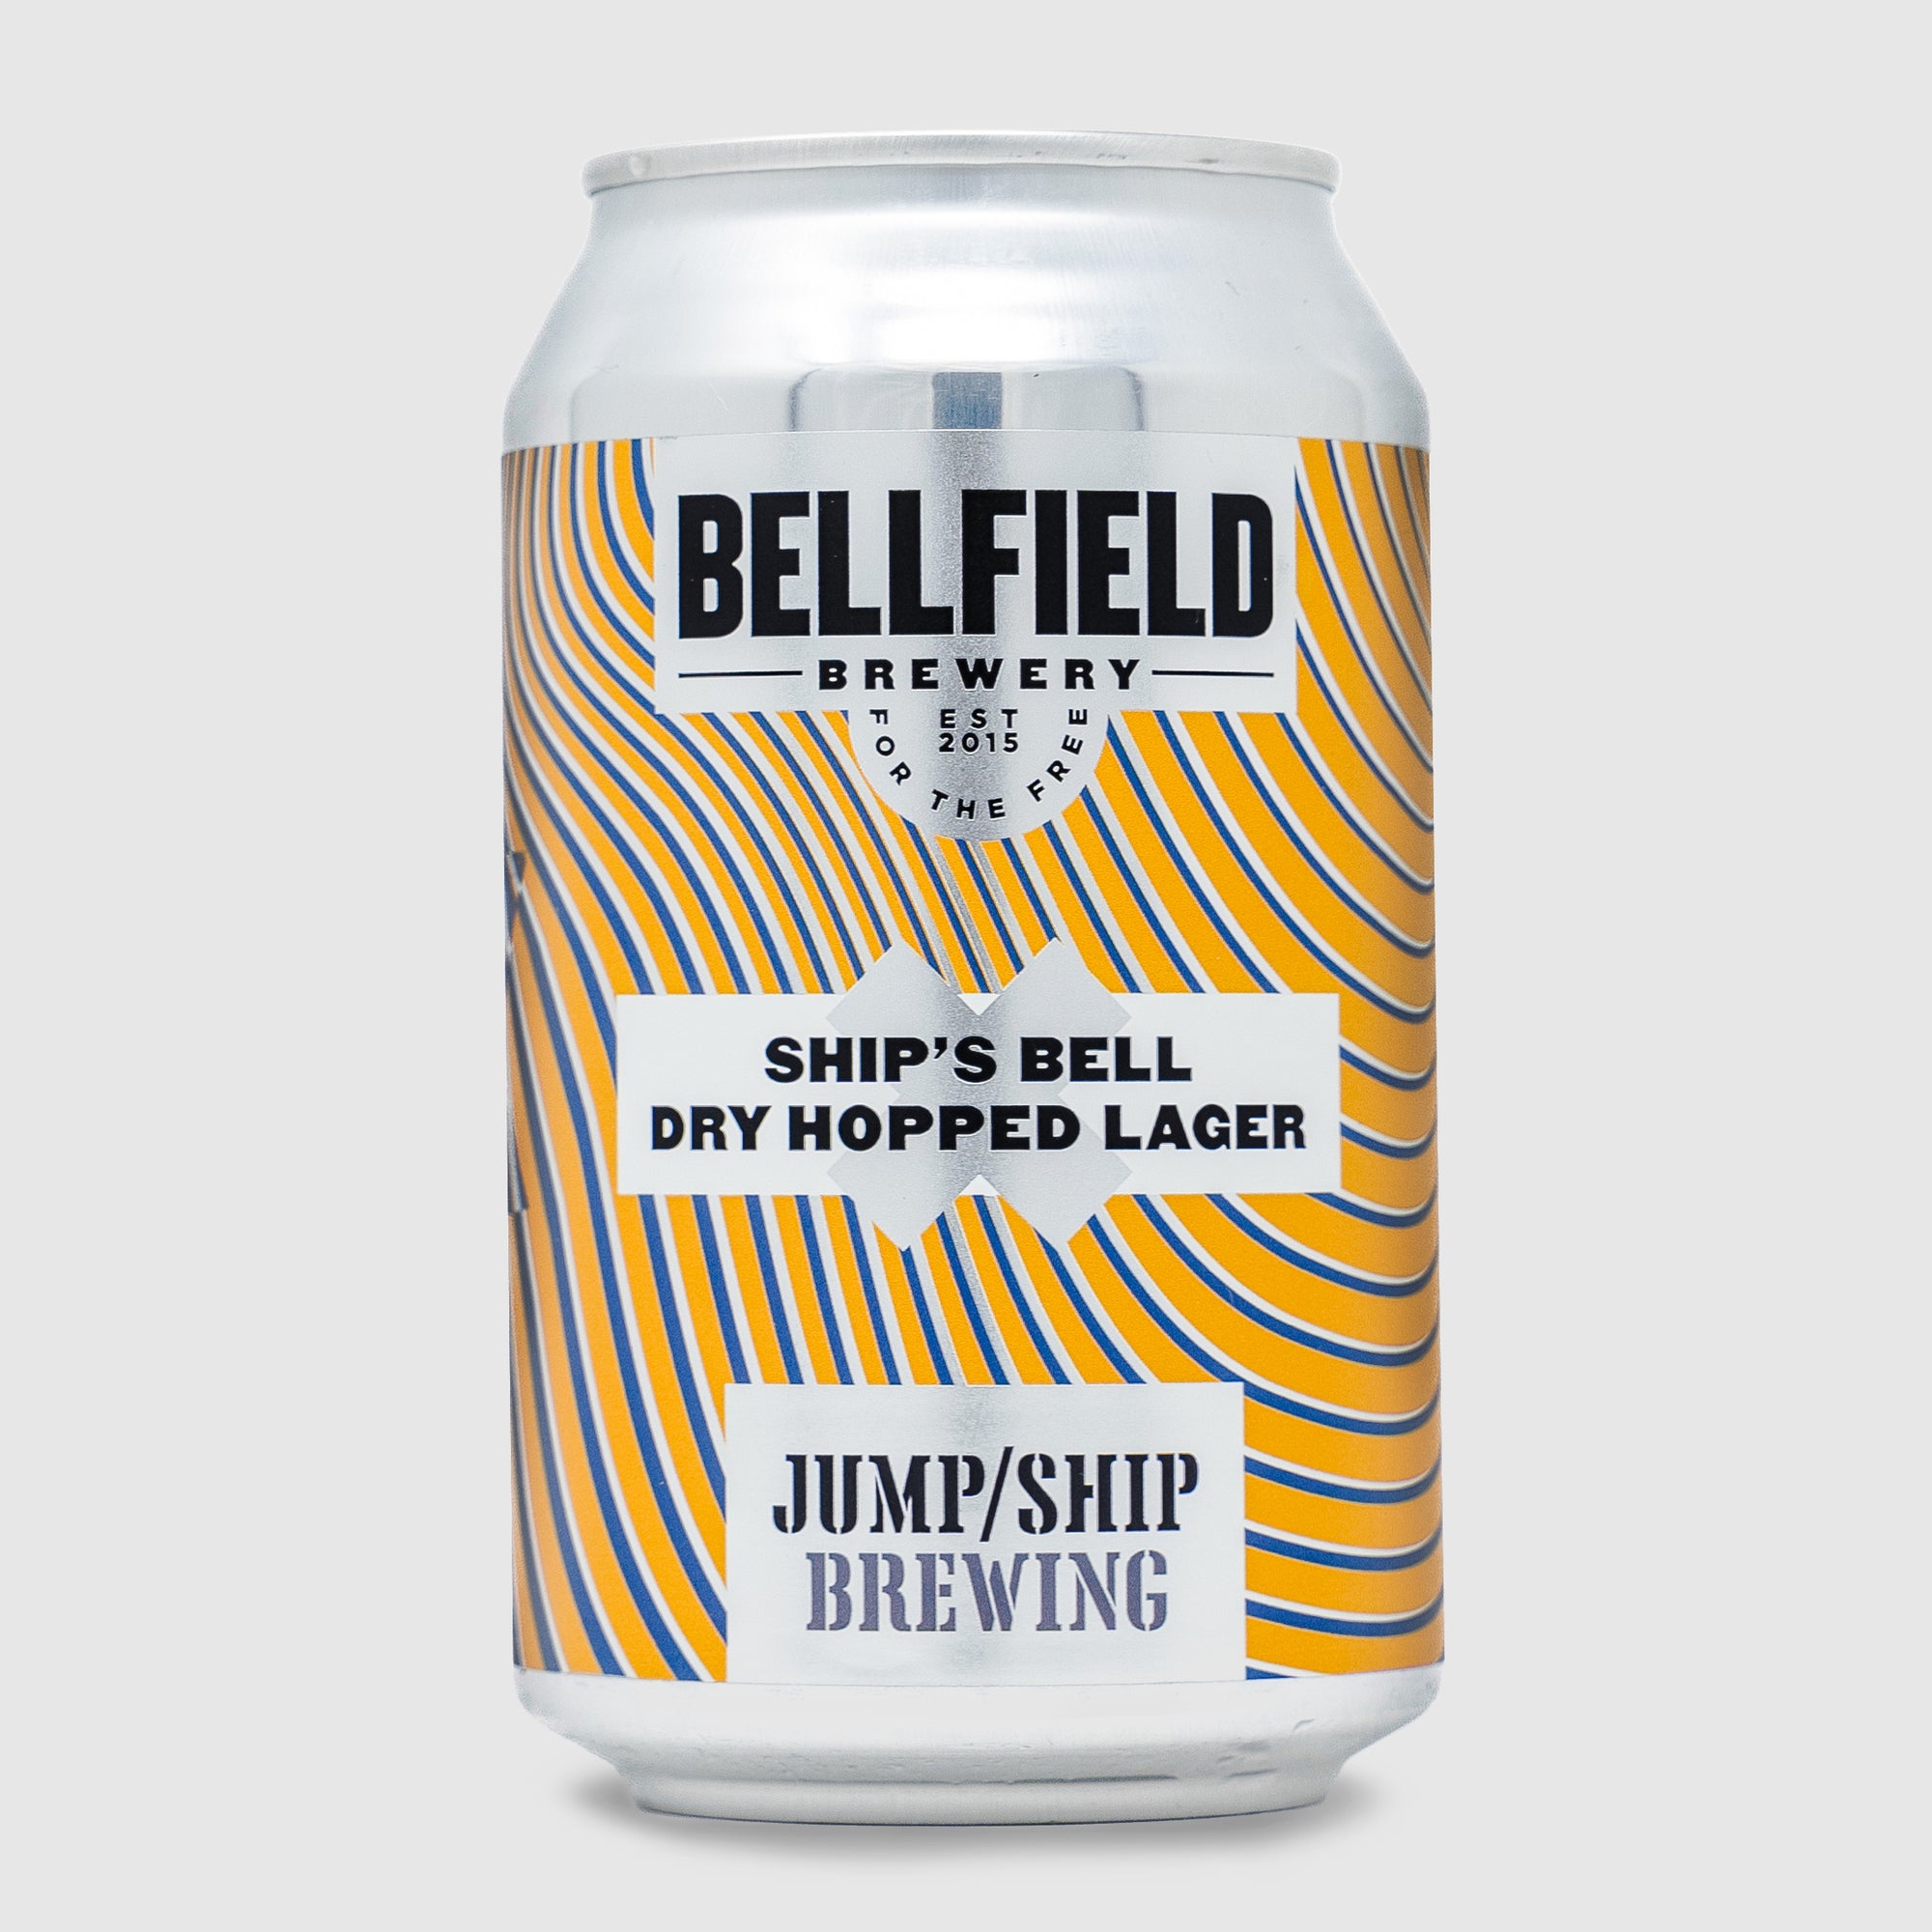 A can of Ship's Bell Dry Hopped Lager.